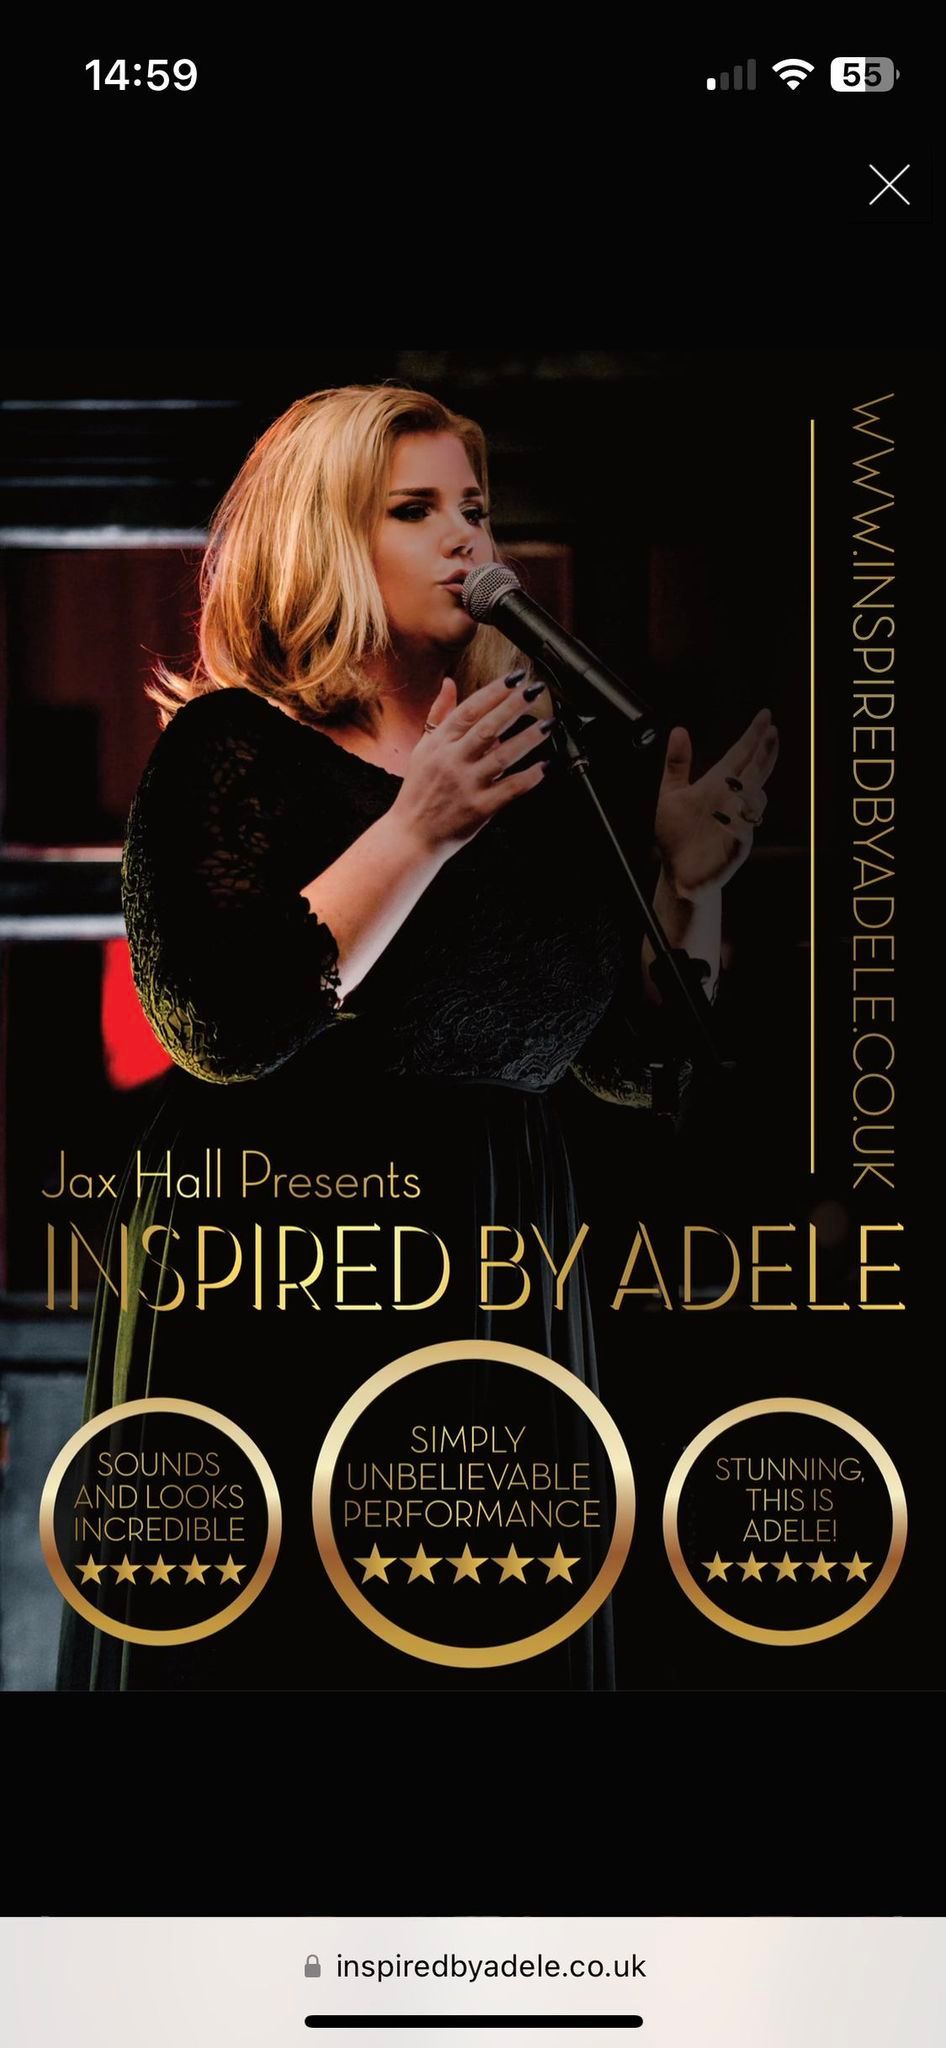 Jax Hall presents Inspired by Adele at The Pymore Inn